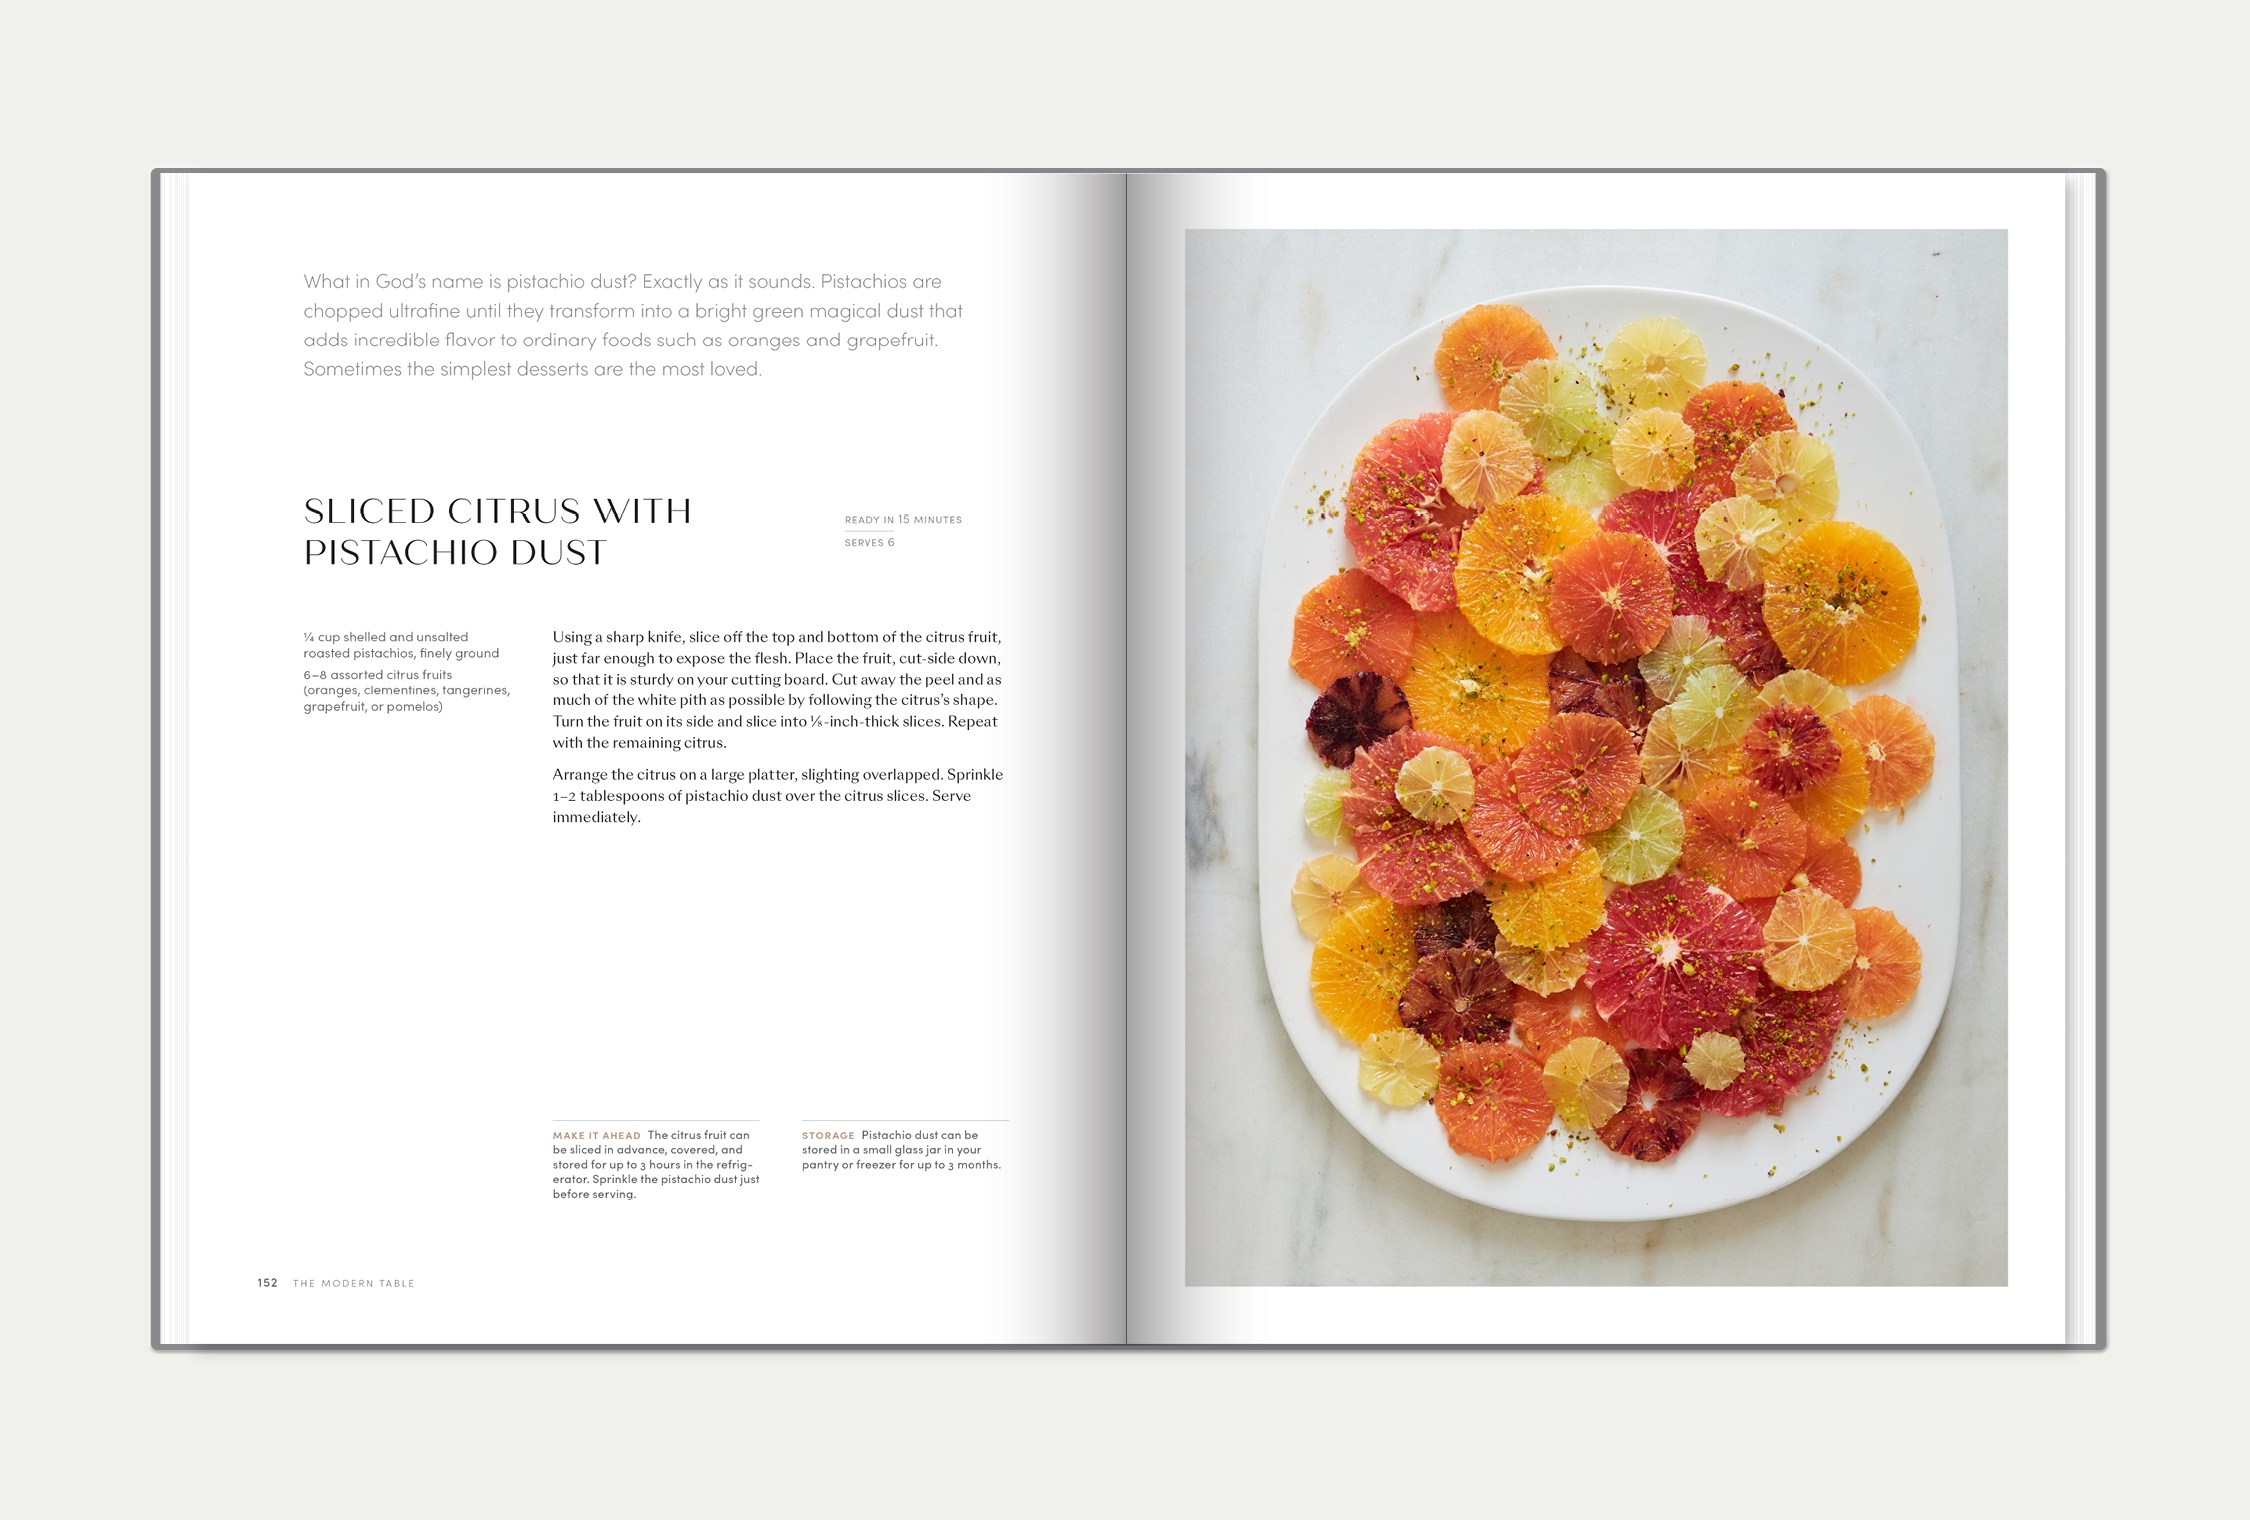 Double-page spread with a recipe and photo